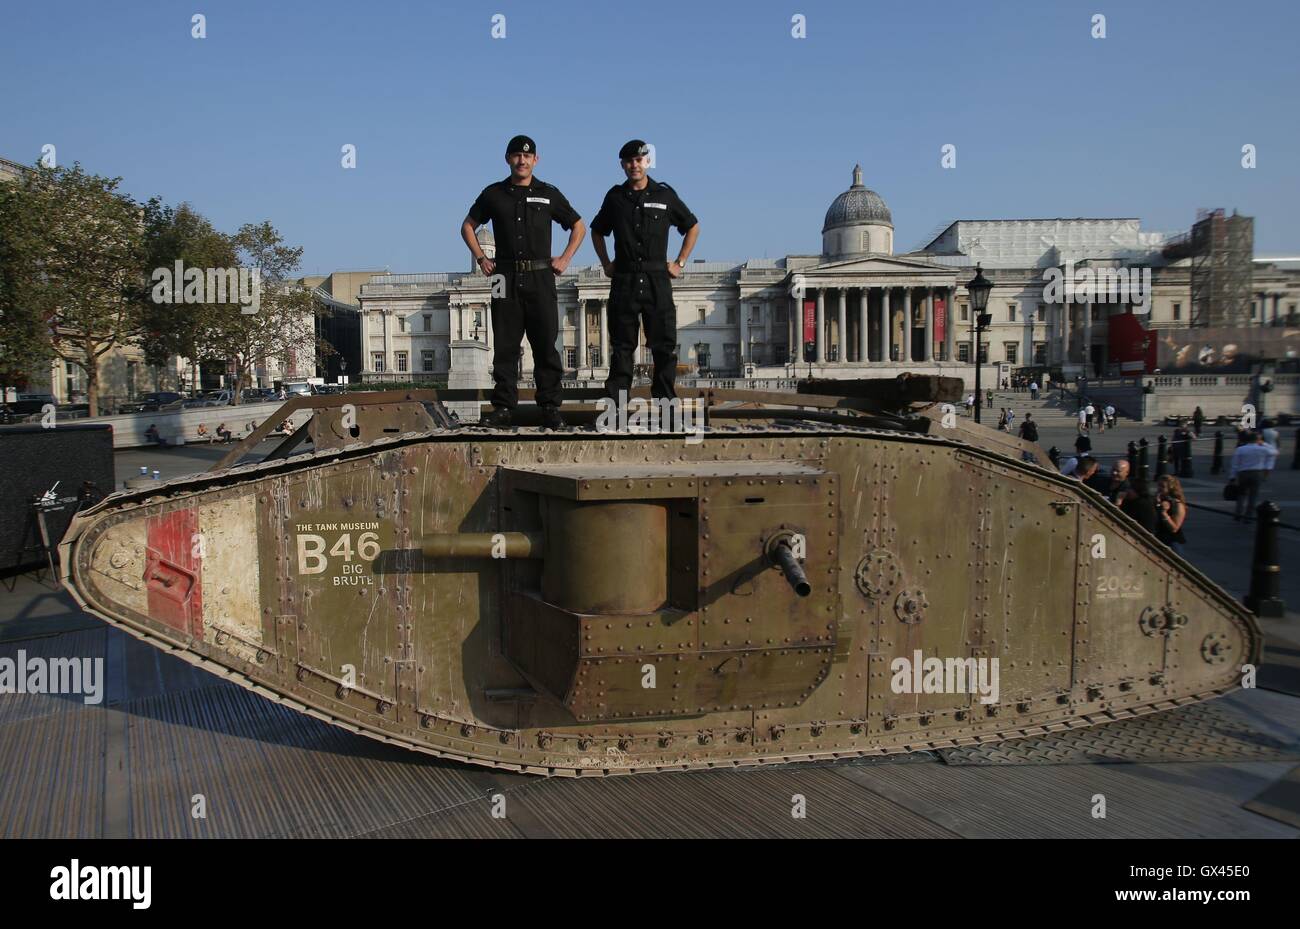 Members of the Royal Tank Regiment stand on a replica First World War Mark IV tank in London's Trafalgar Square marking the centenary of an armoured vehicle's first-ever deployment during the Battle of the Somme. Stock Photo